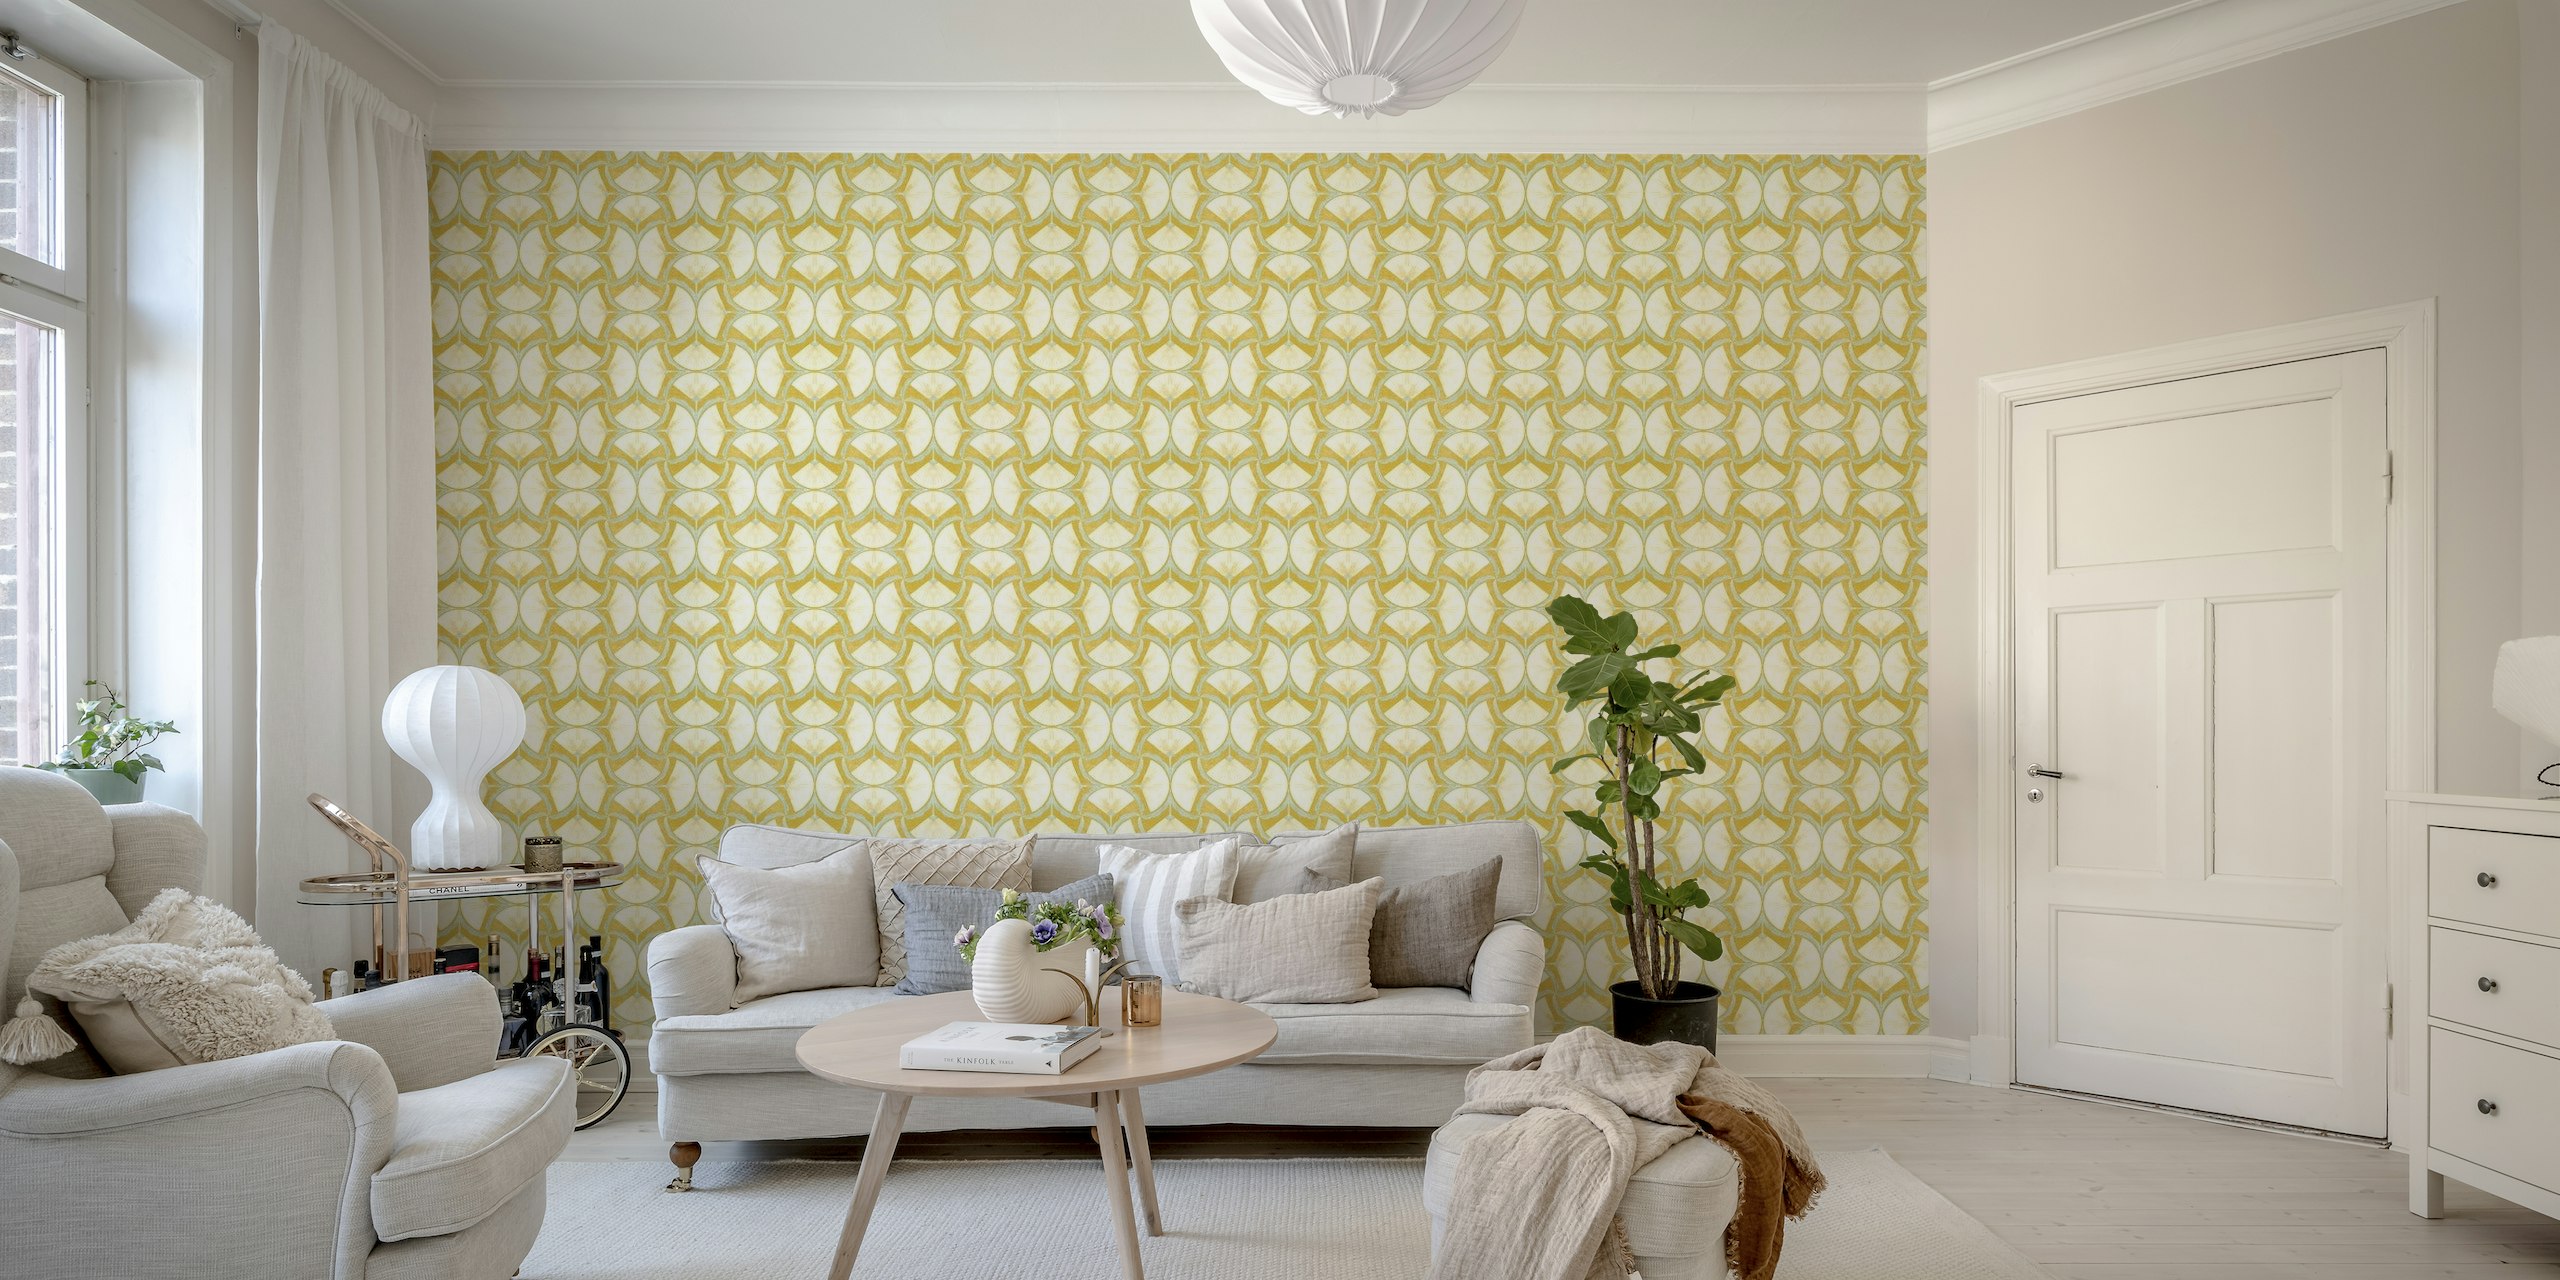 Floral Harmony: Delicate Hand-Drawn Symmetry on mustard background papel de parede